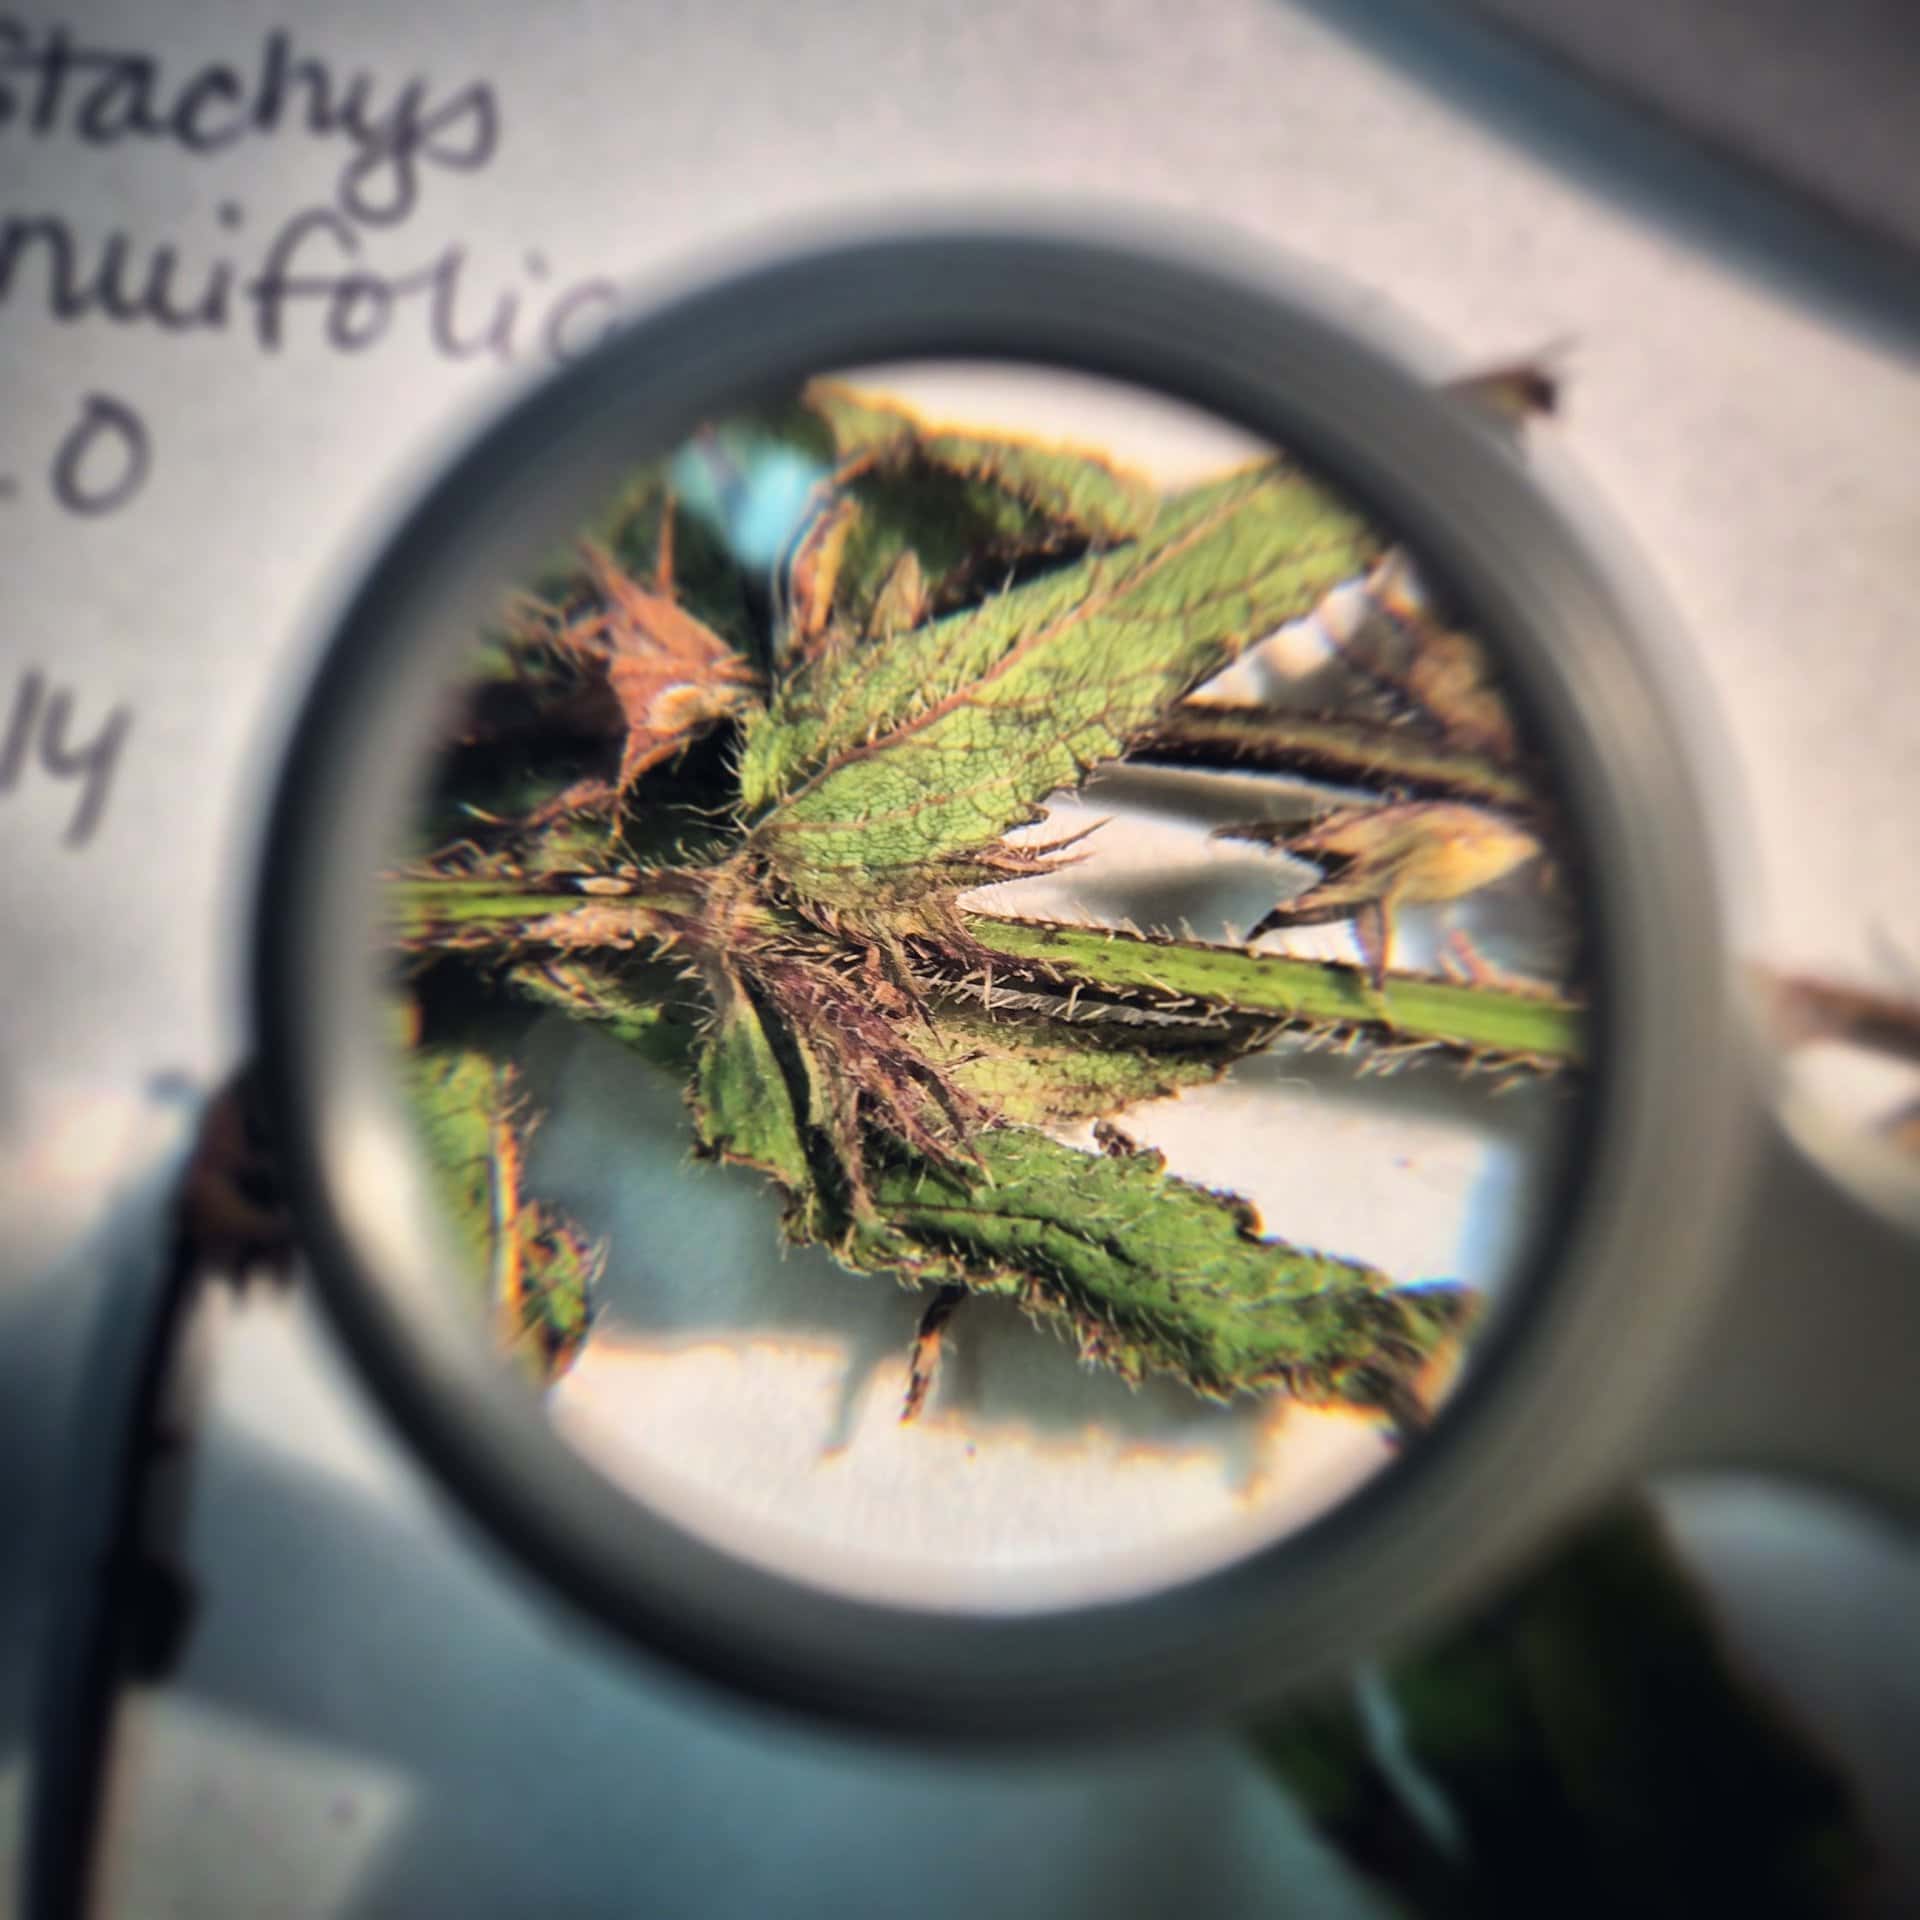 Closeup of plant under magnifying glass